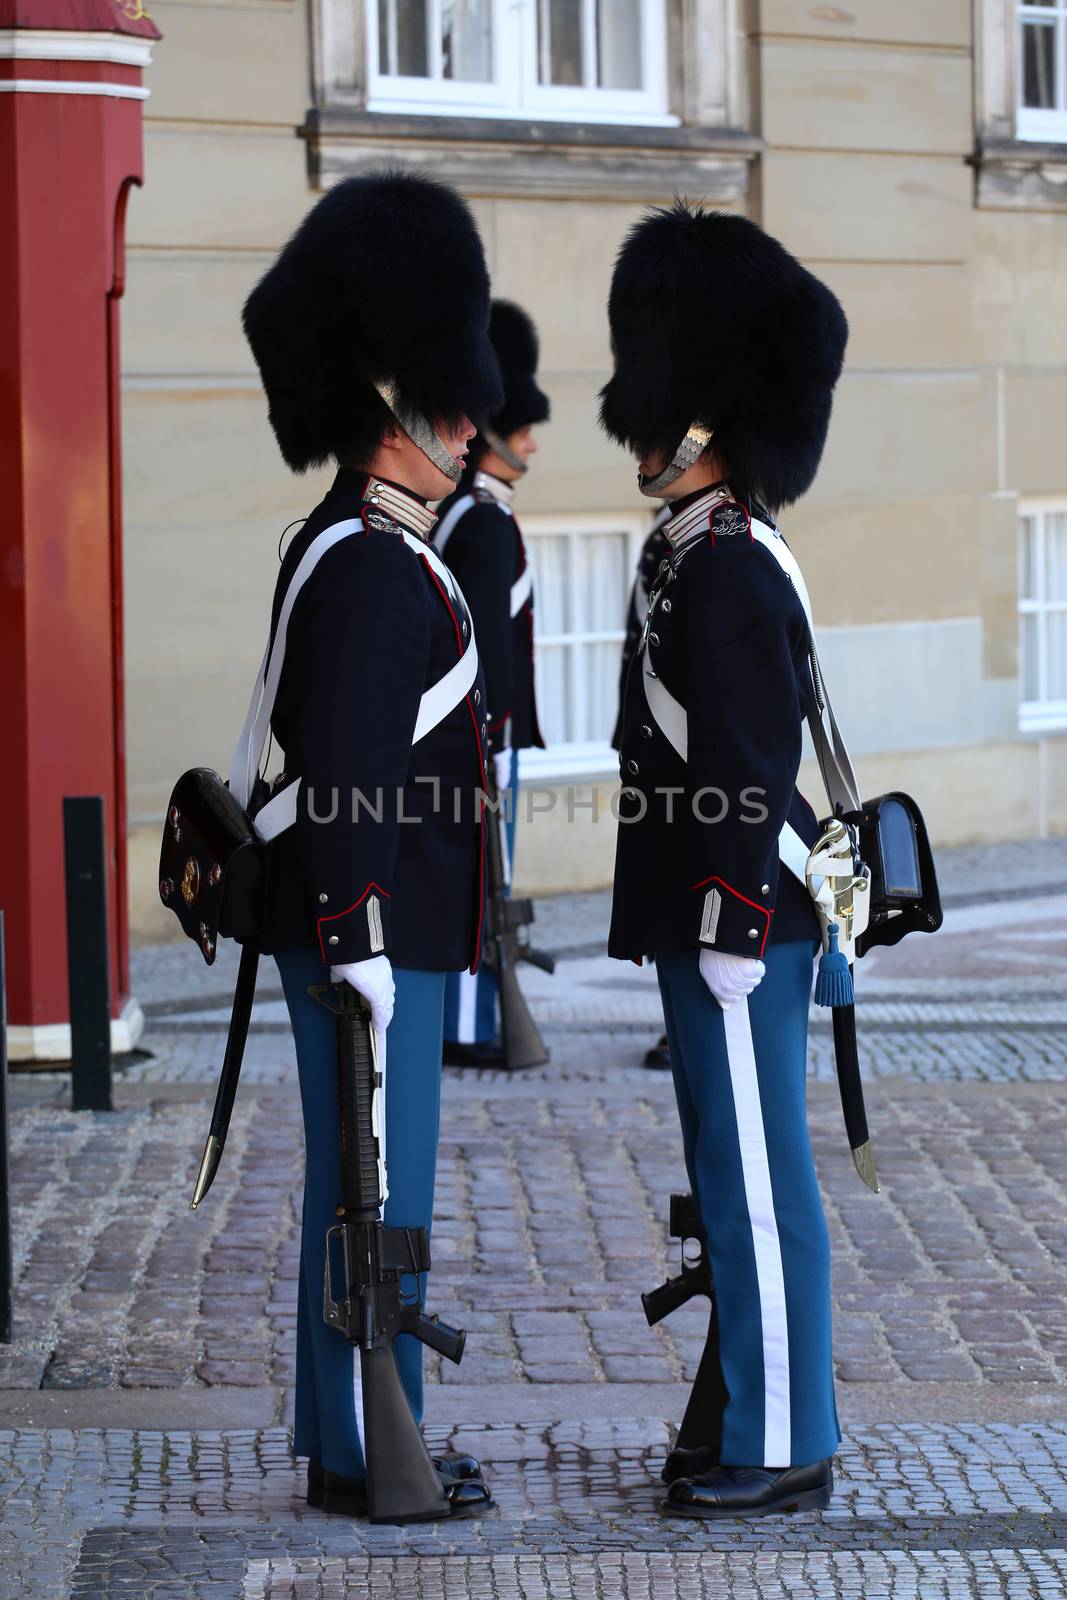 COPENHAGEN, DENMARK - AUGUST 15, 2016: Danish Royal Life Guards line up for the changing of the guards on the central plaza of Amalienborg palace in Copenhagen, Denmark on August 15, 2016.